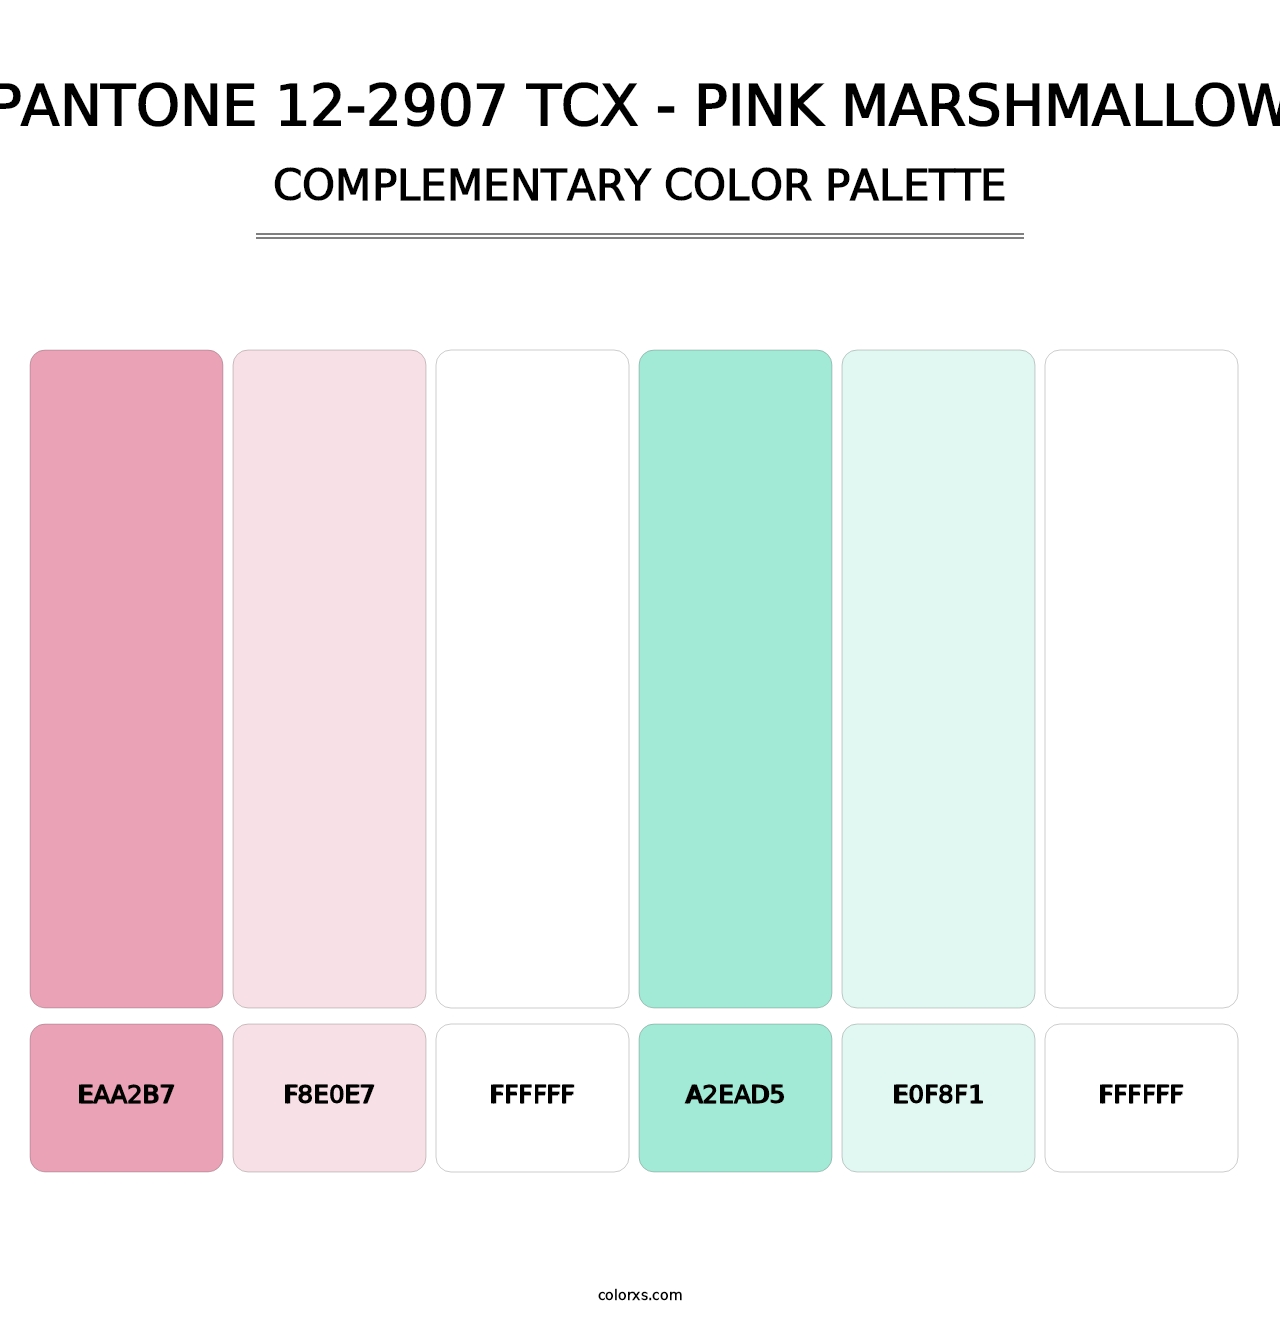 PANTONE 12-2907 TCX - Pink Marshmallow - Complementary Color Palette